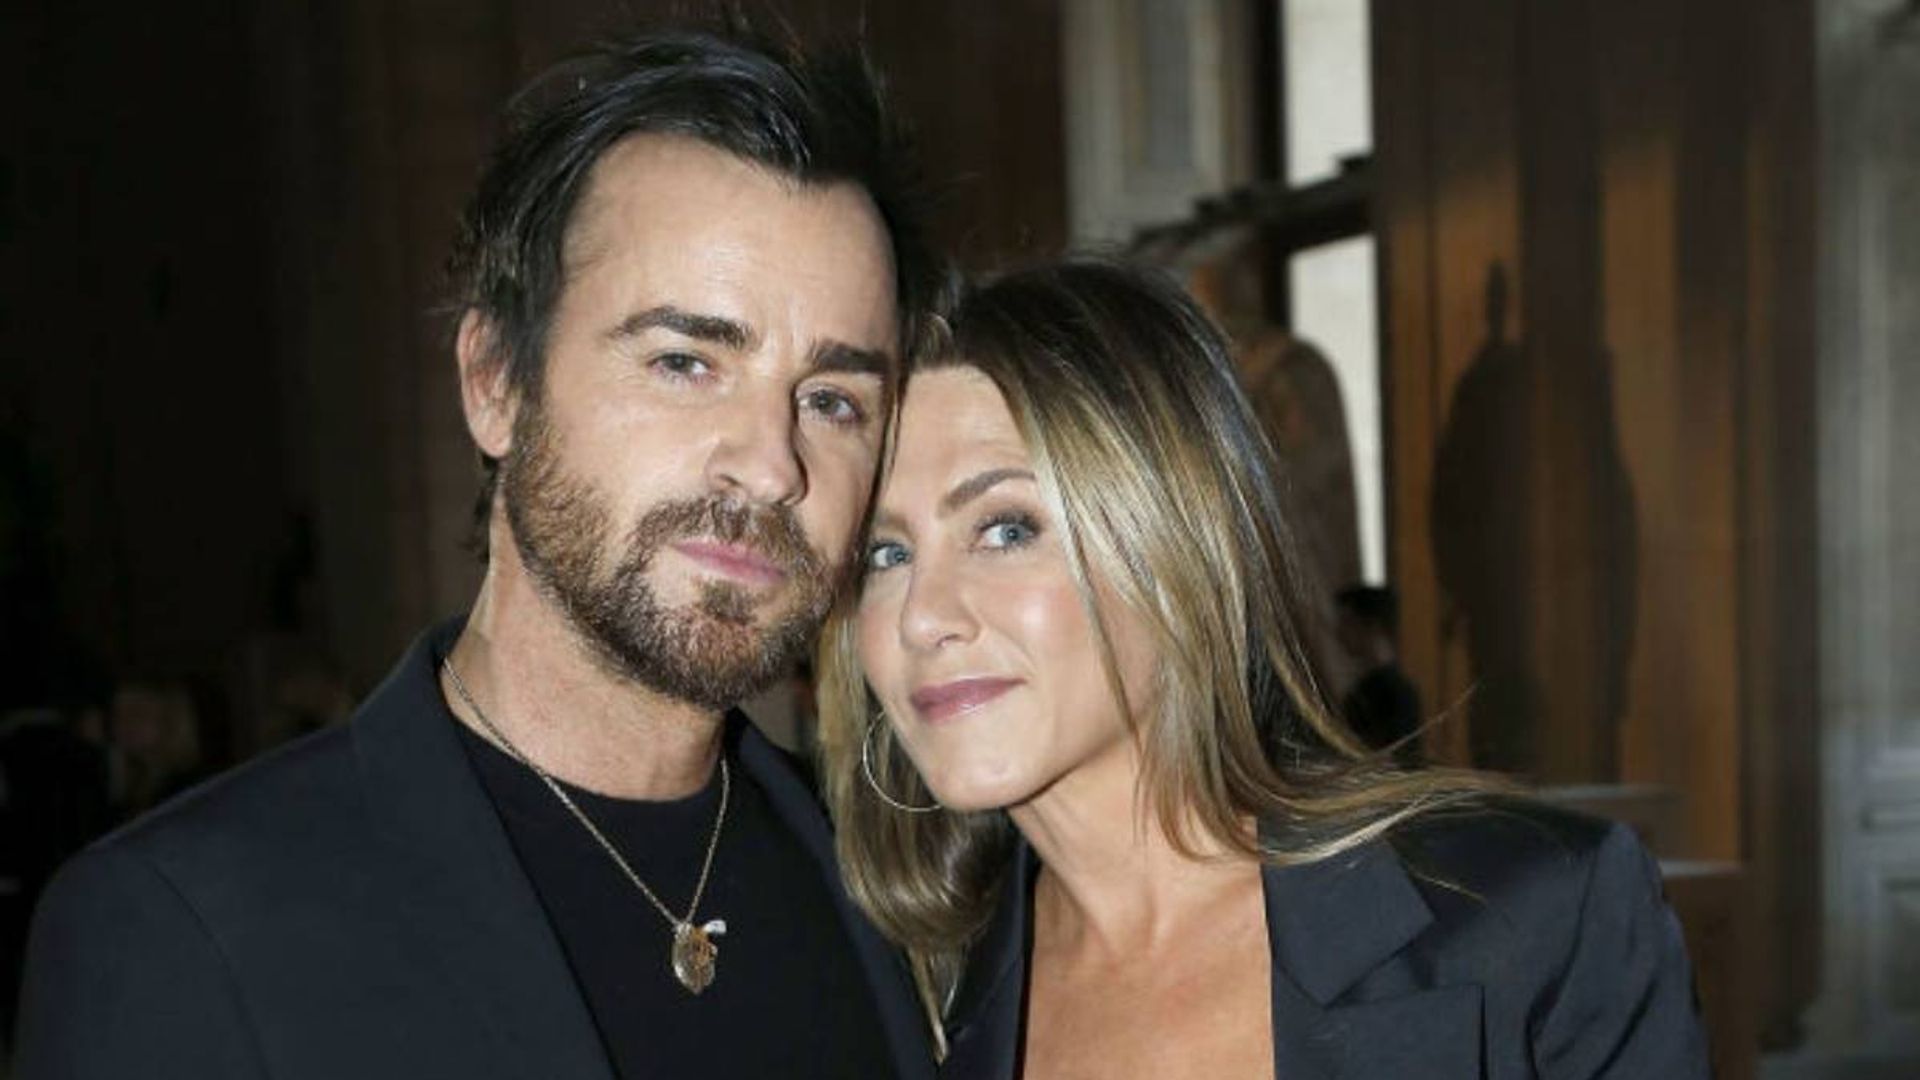 Theroux 2018 who is justin dating Justin Theroux